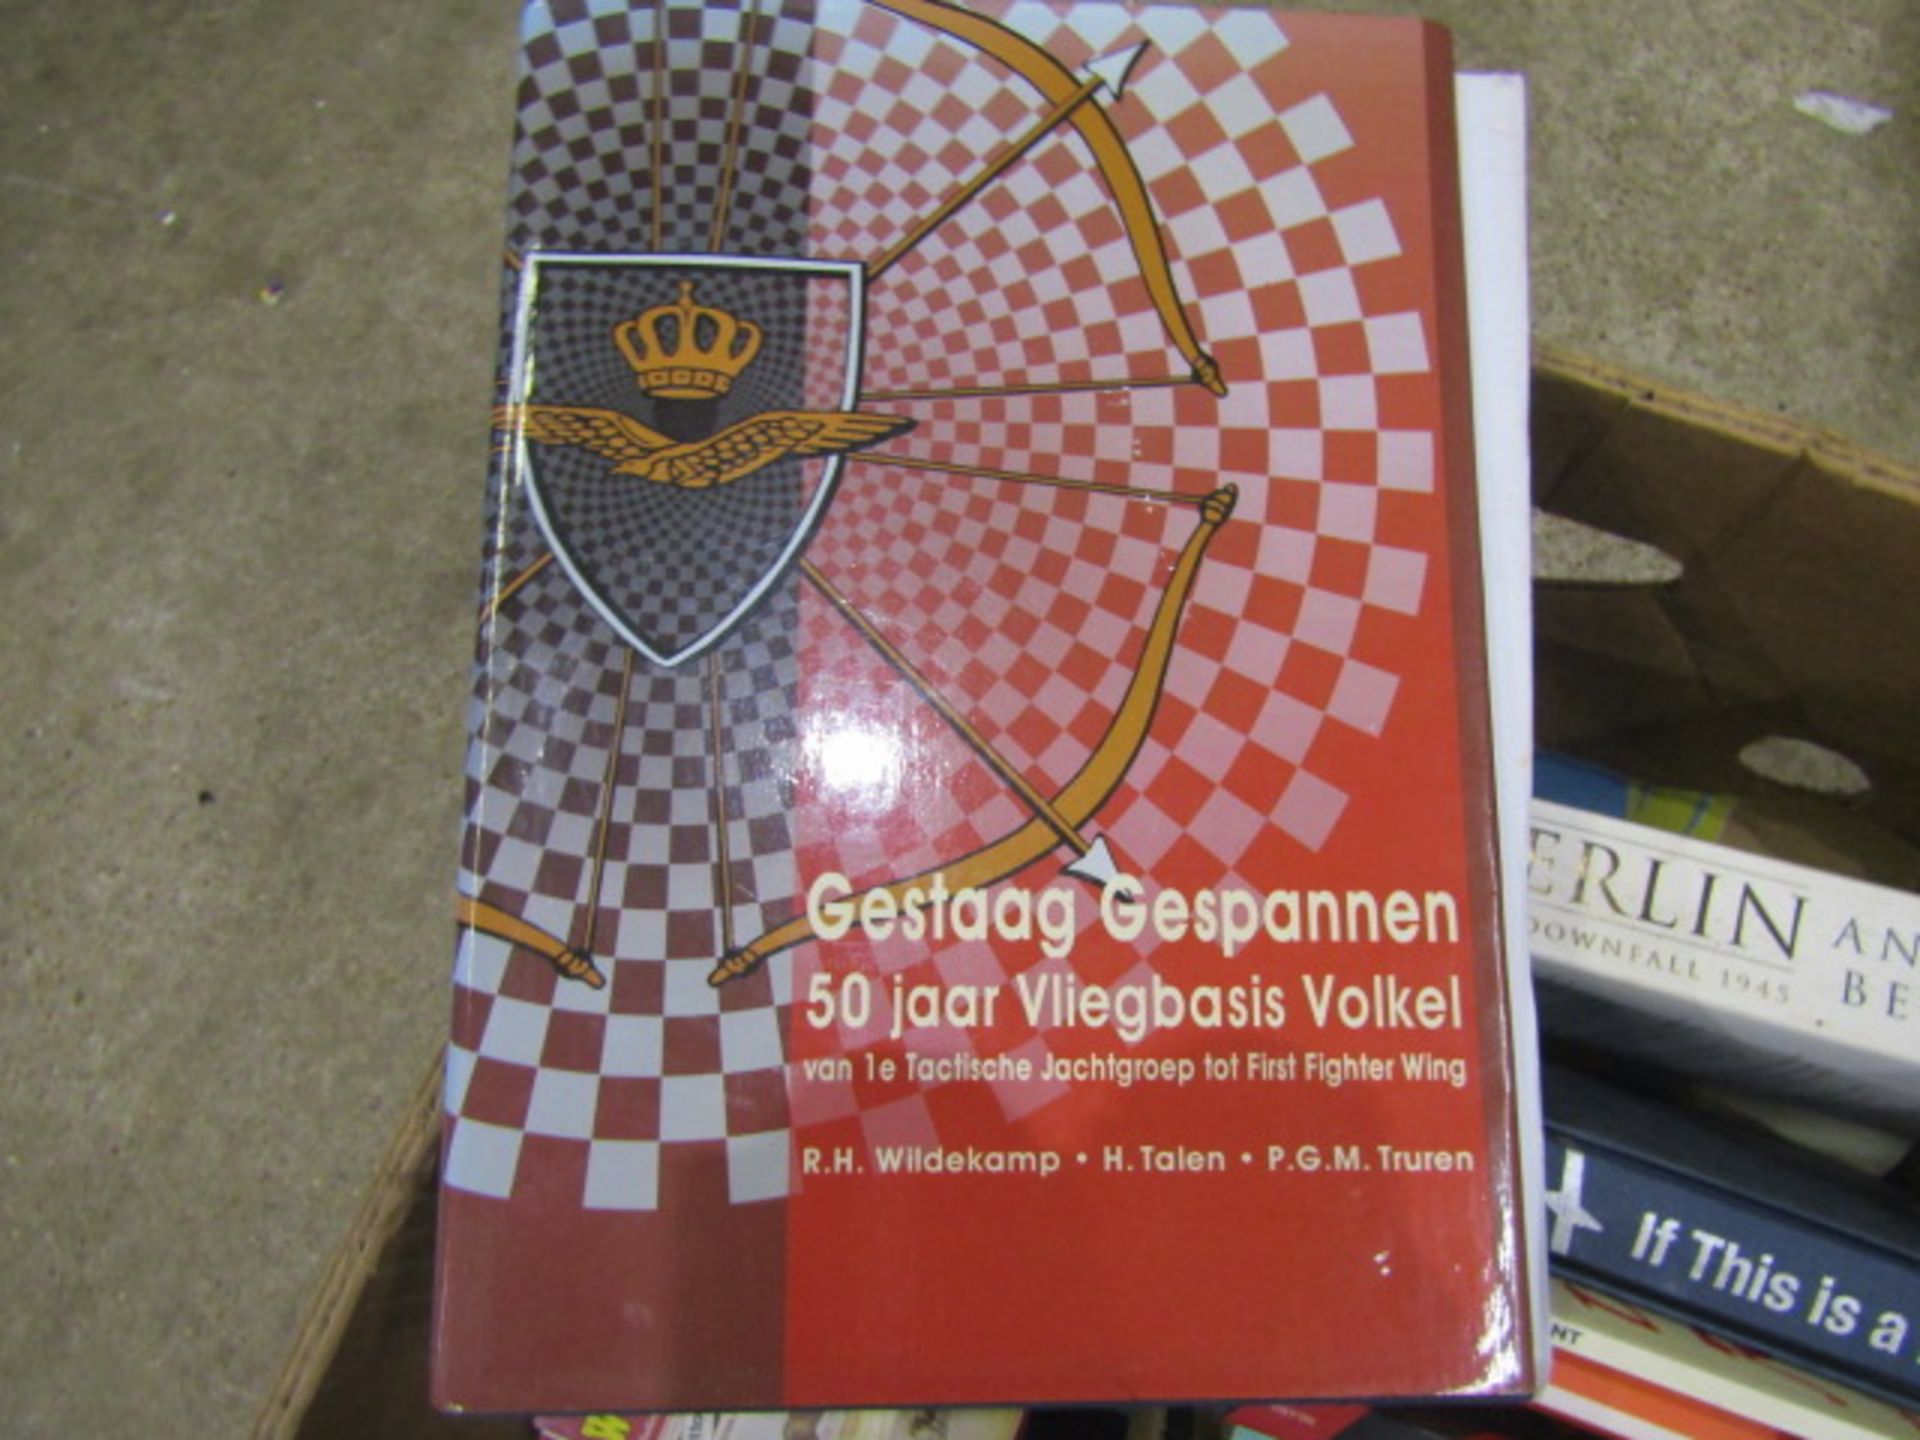 Militaria books inc signed copy Gestaag Gespannan - Image 2 of 10